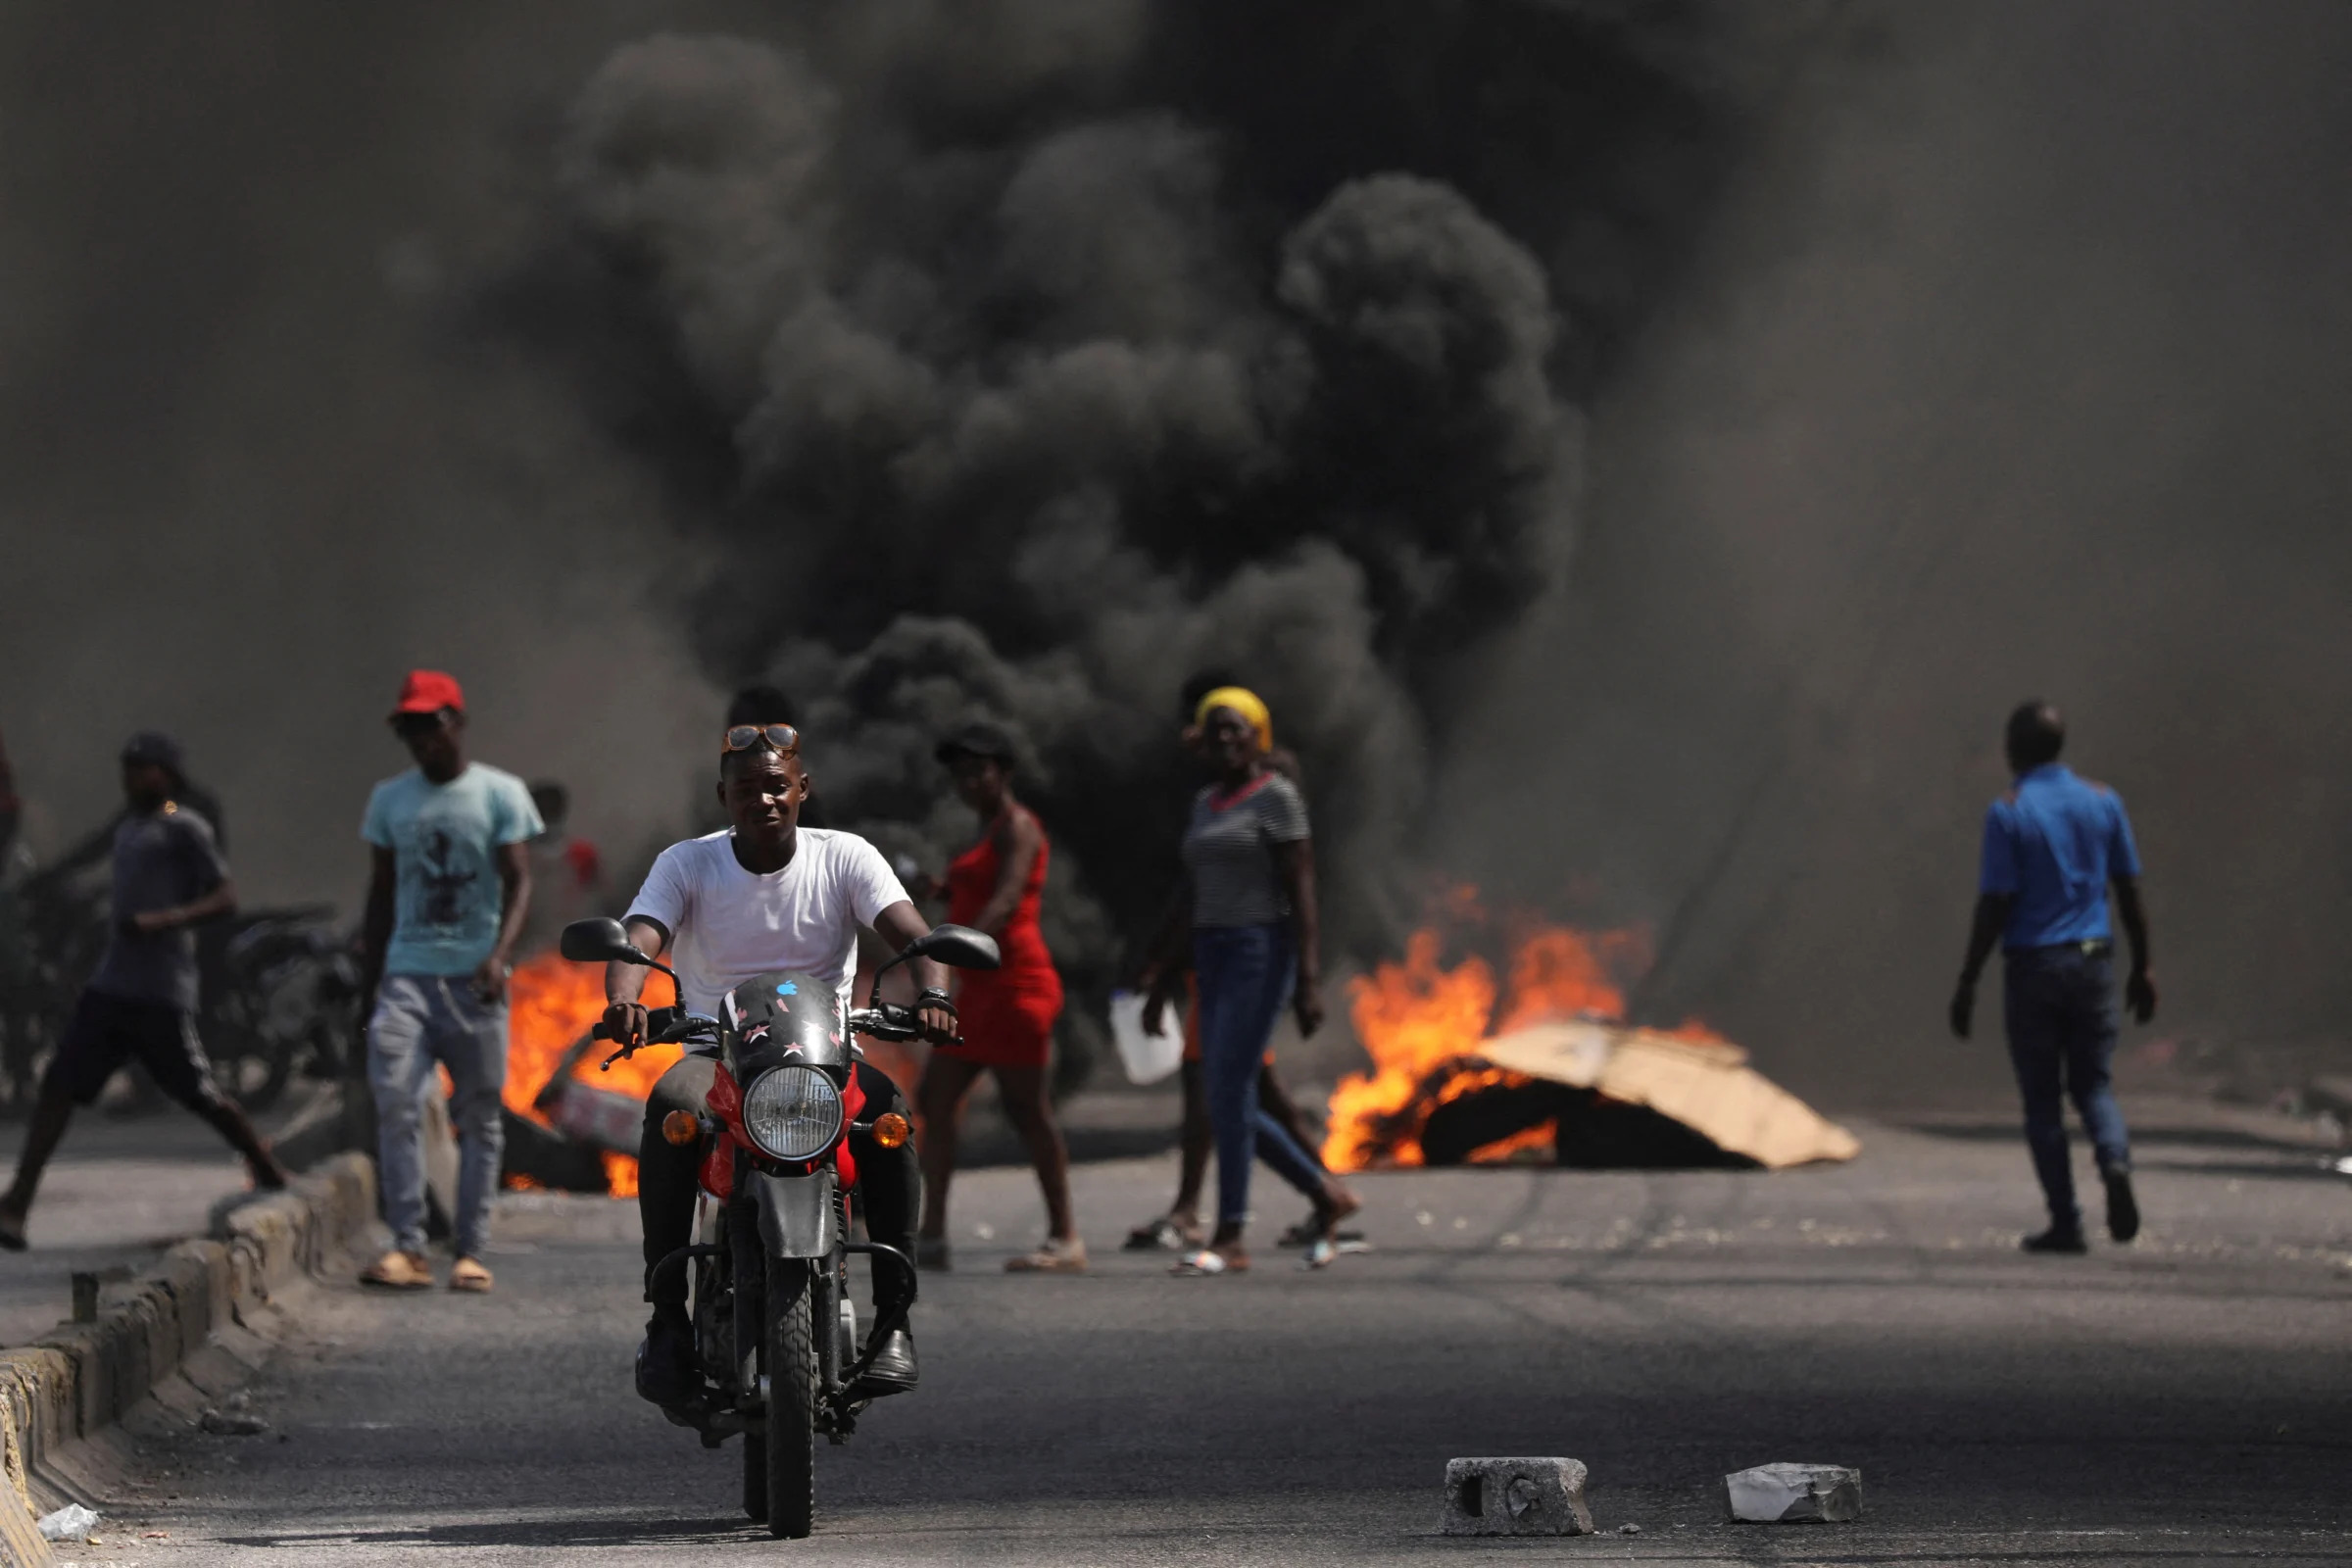 A burning barricade during a protest in Port-au-Prince, Haiti